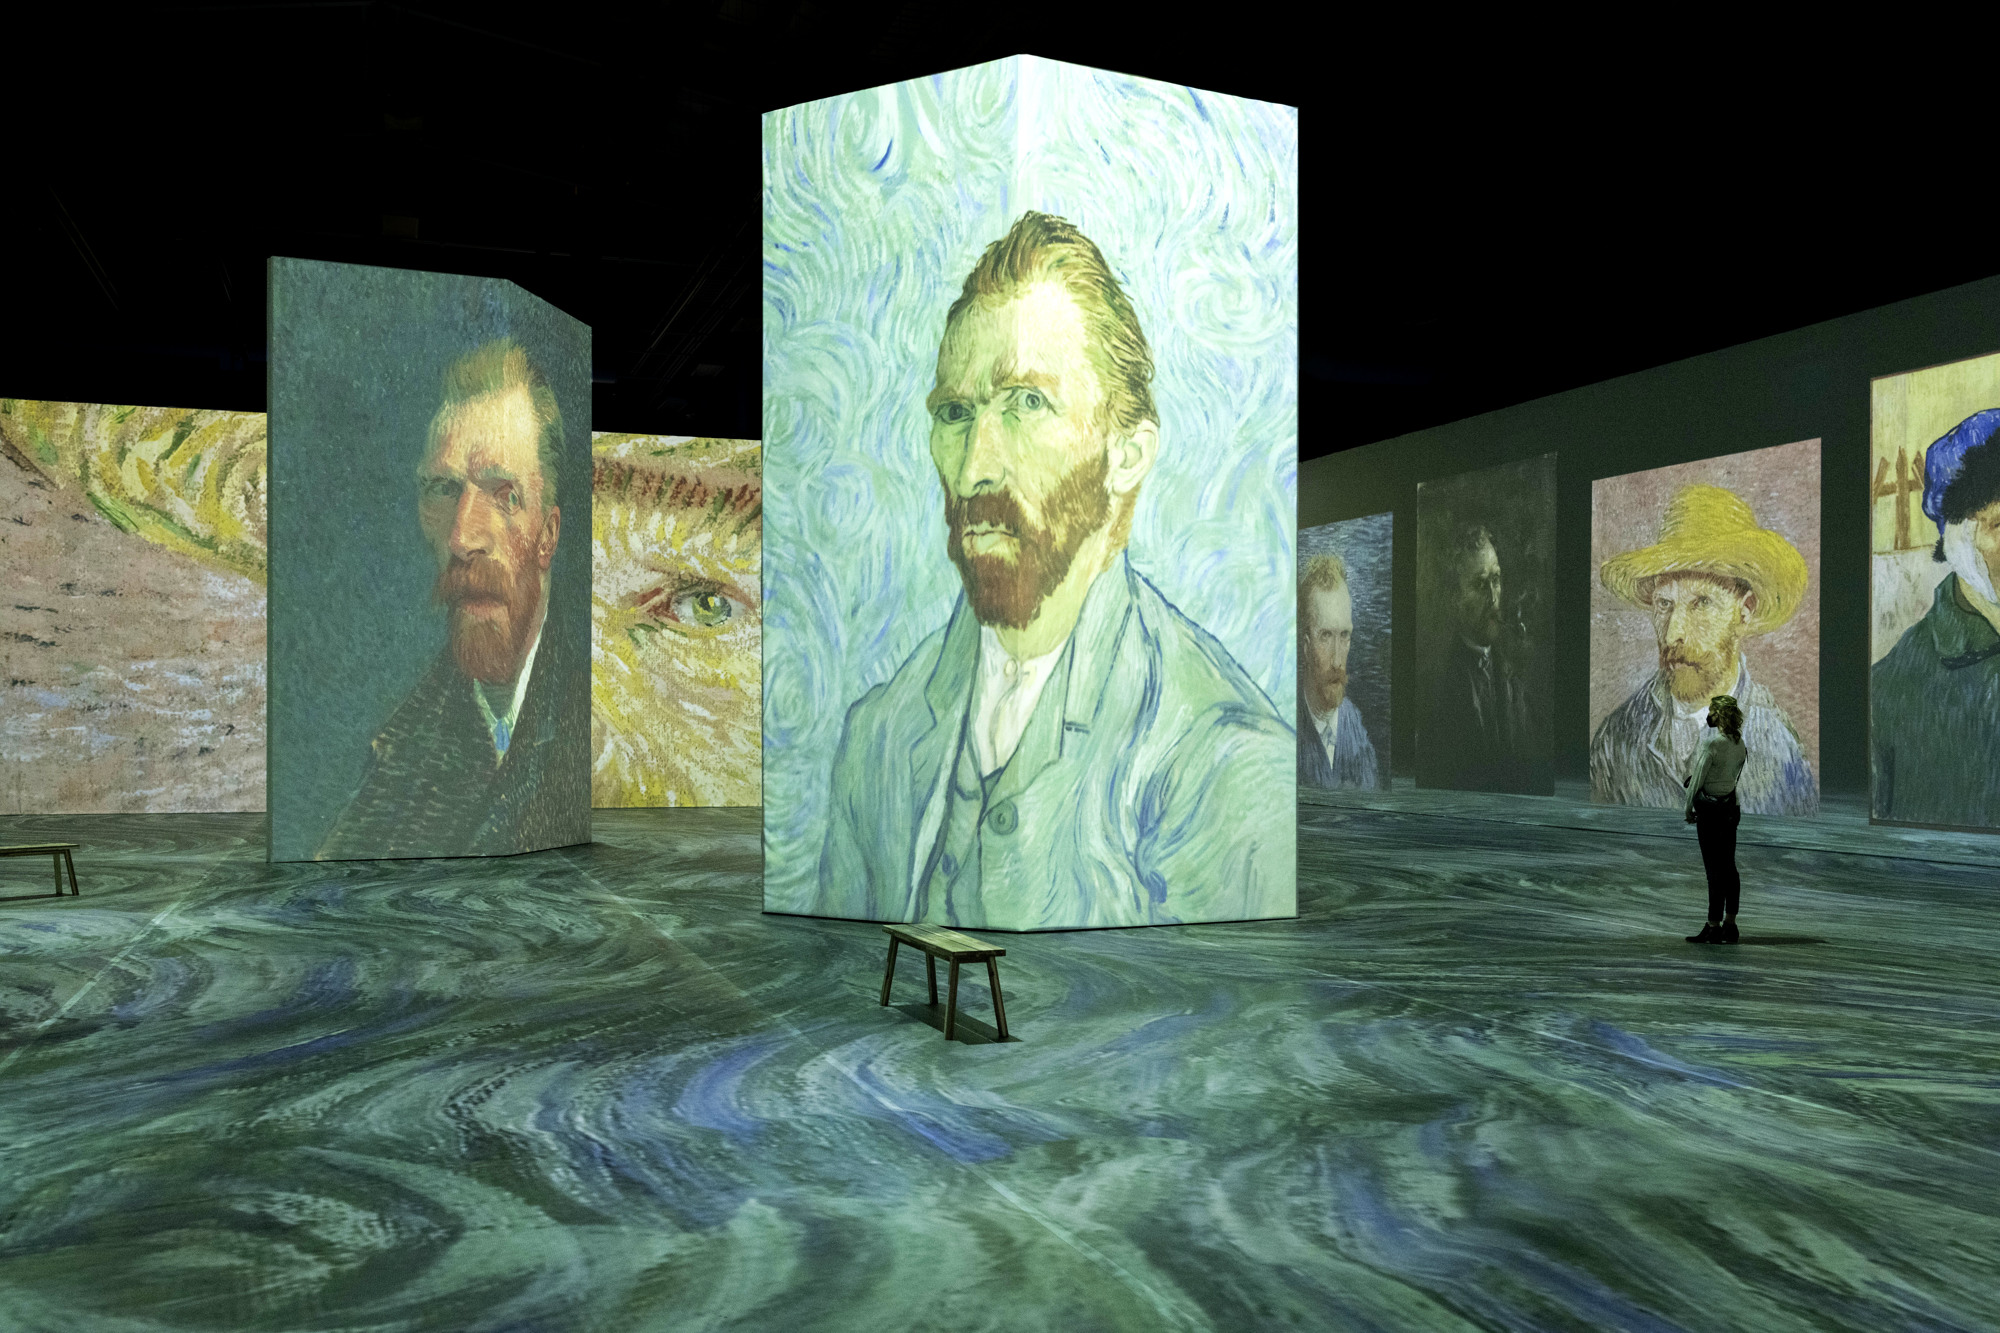 “Beyond Van Gogh” uses projection technology and an original score to showcase 300 of the painter’s artworks occupying 30,000 square feet.